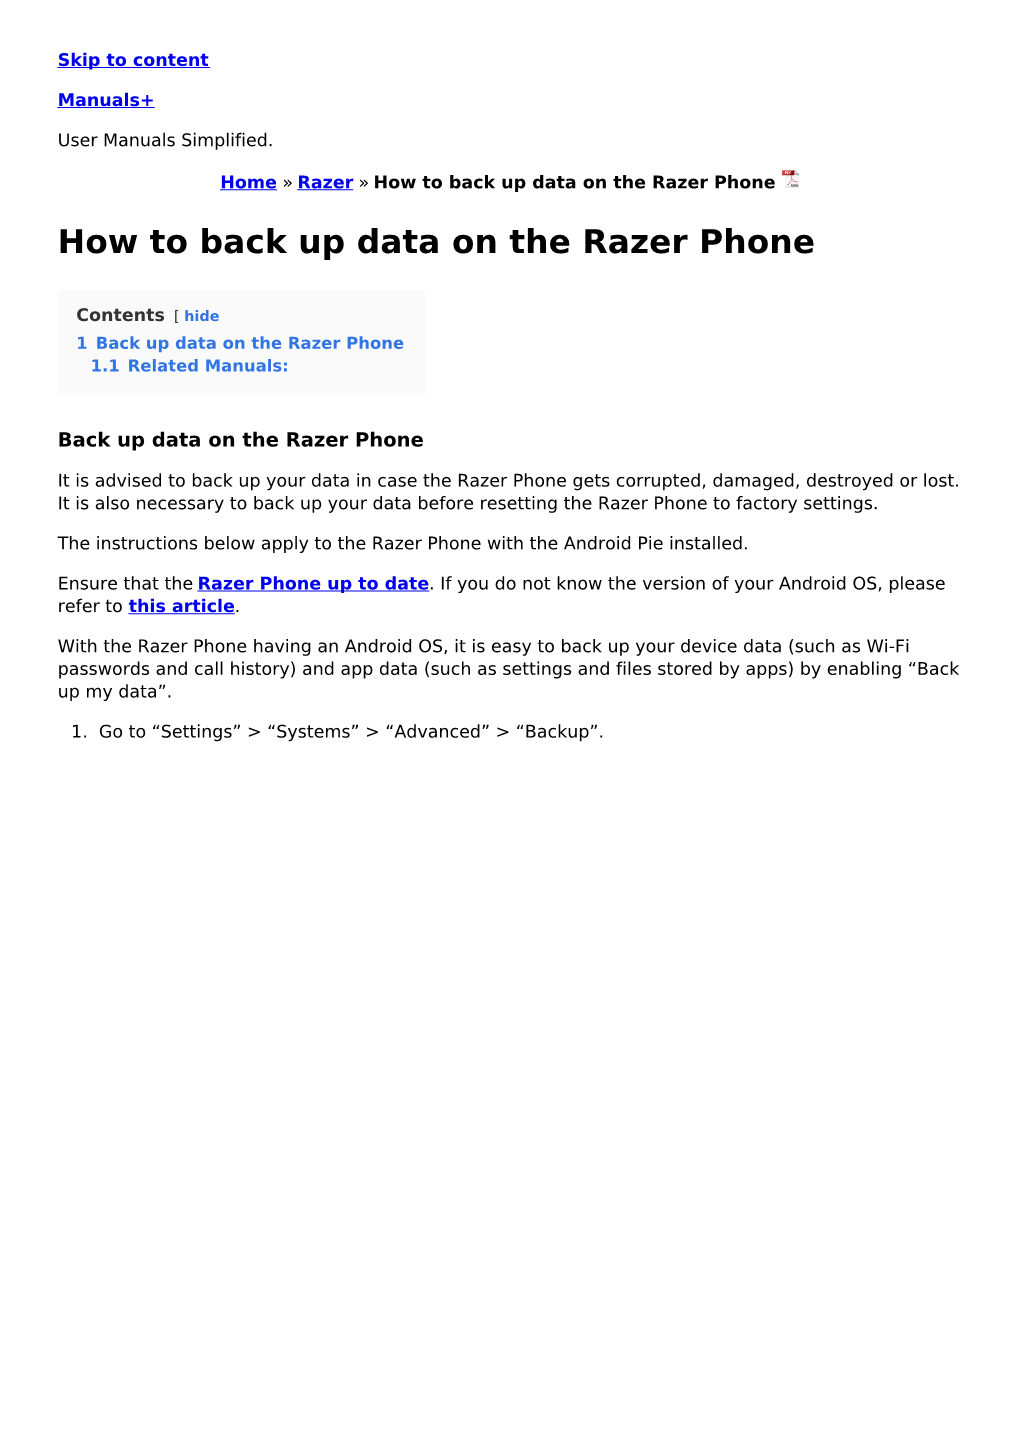 How to Back up Data on the Razer Phone